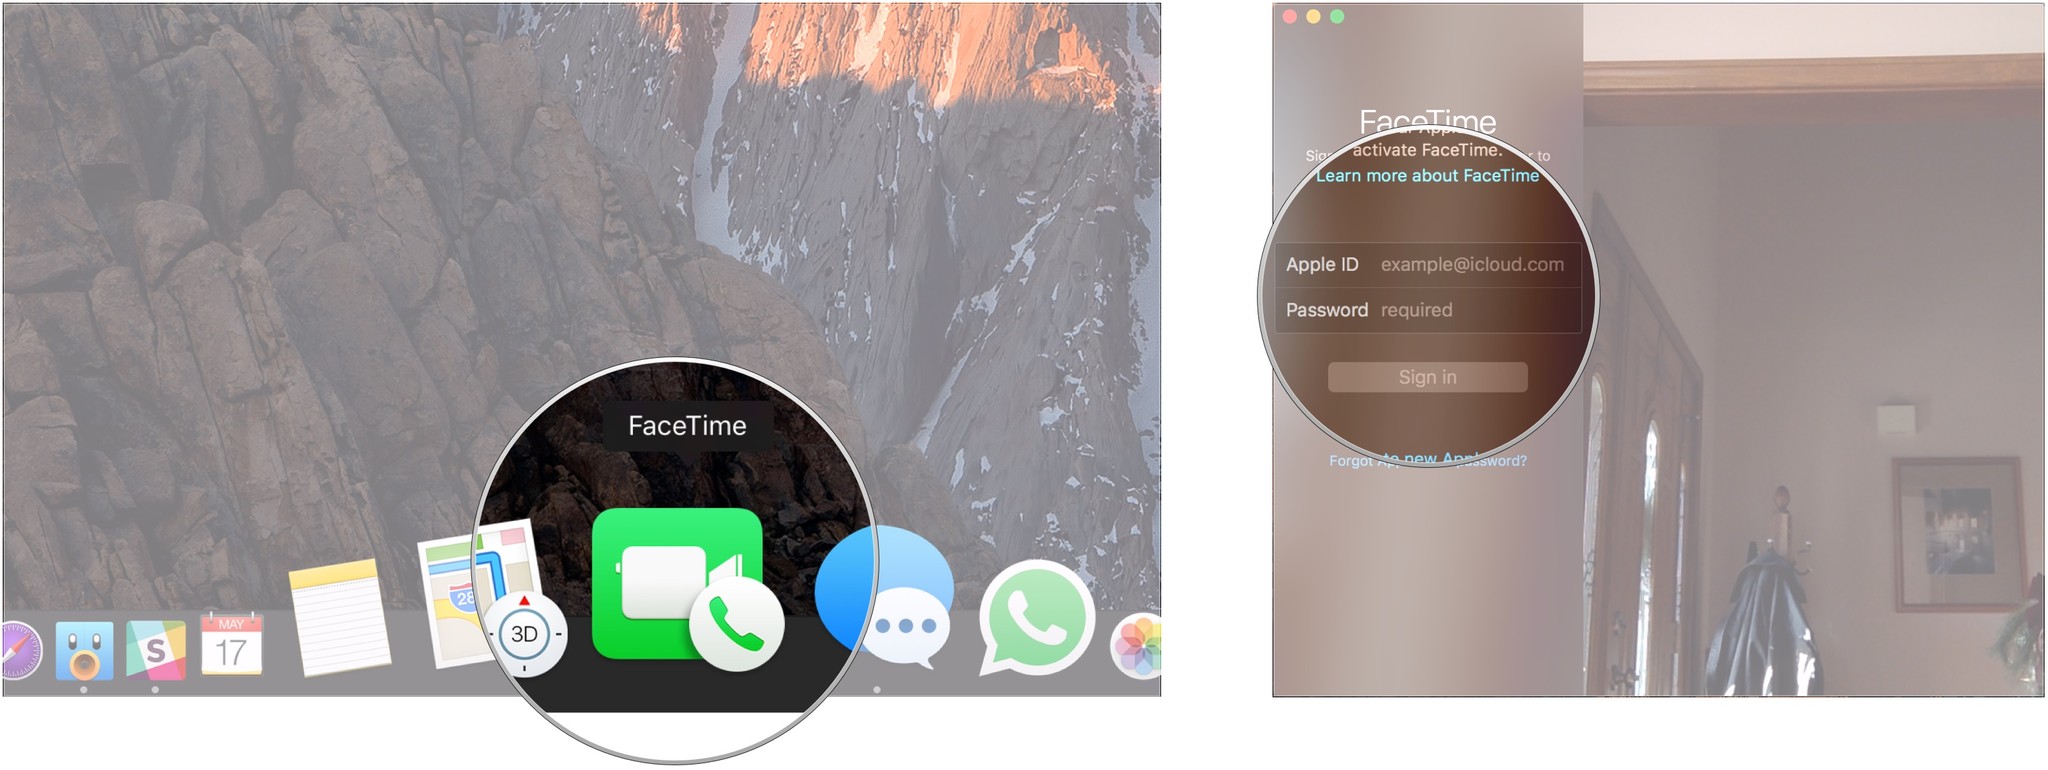 Set up FaceTime, showing how to open FaceTime, then enter your Apple ID